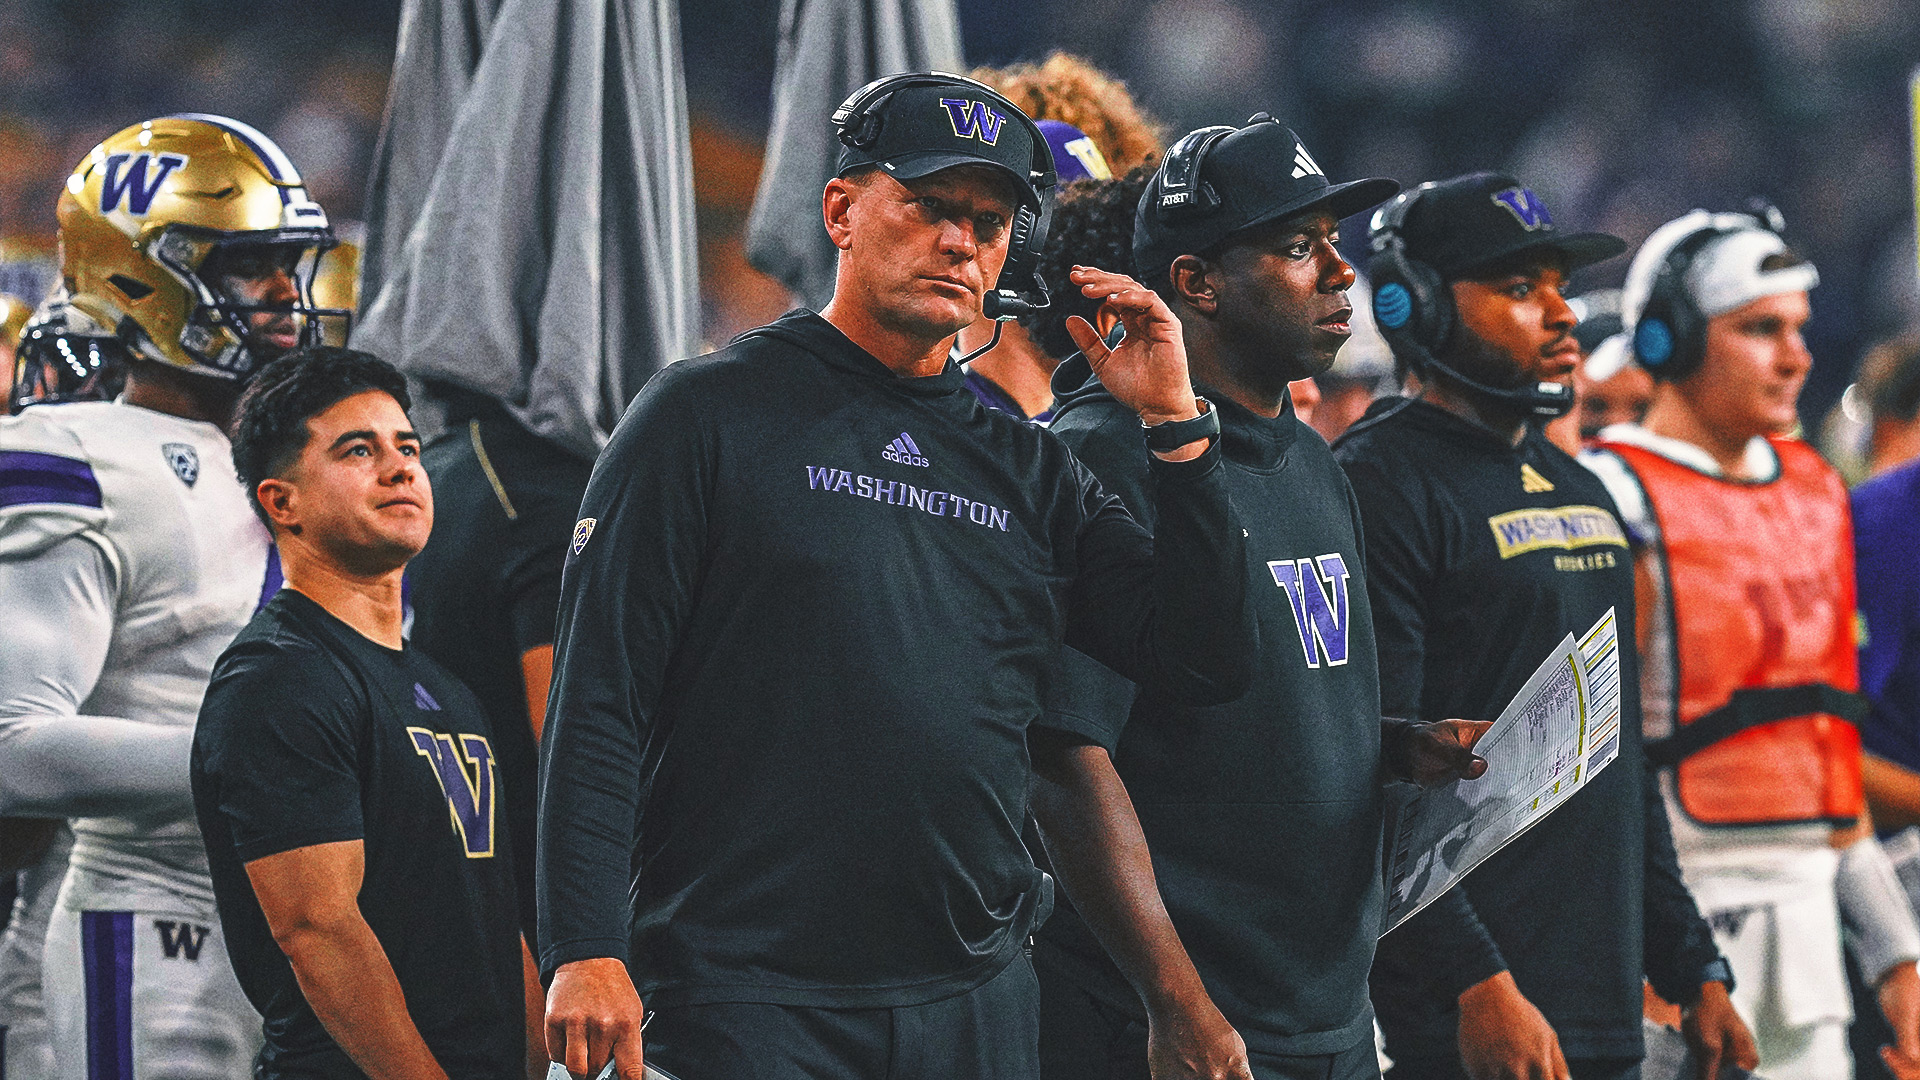 Washington trying to rebuild after title game loss, head coach departure